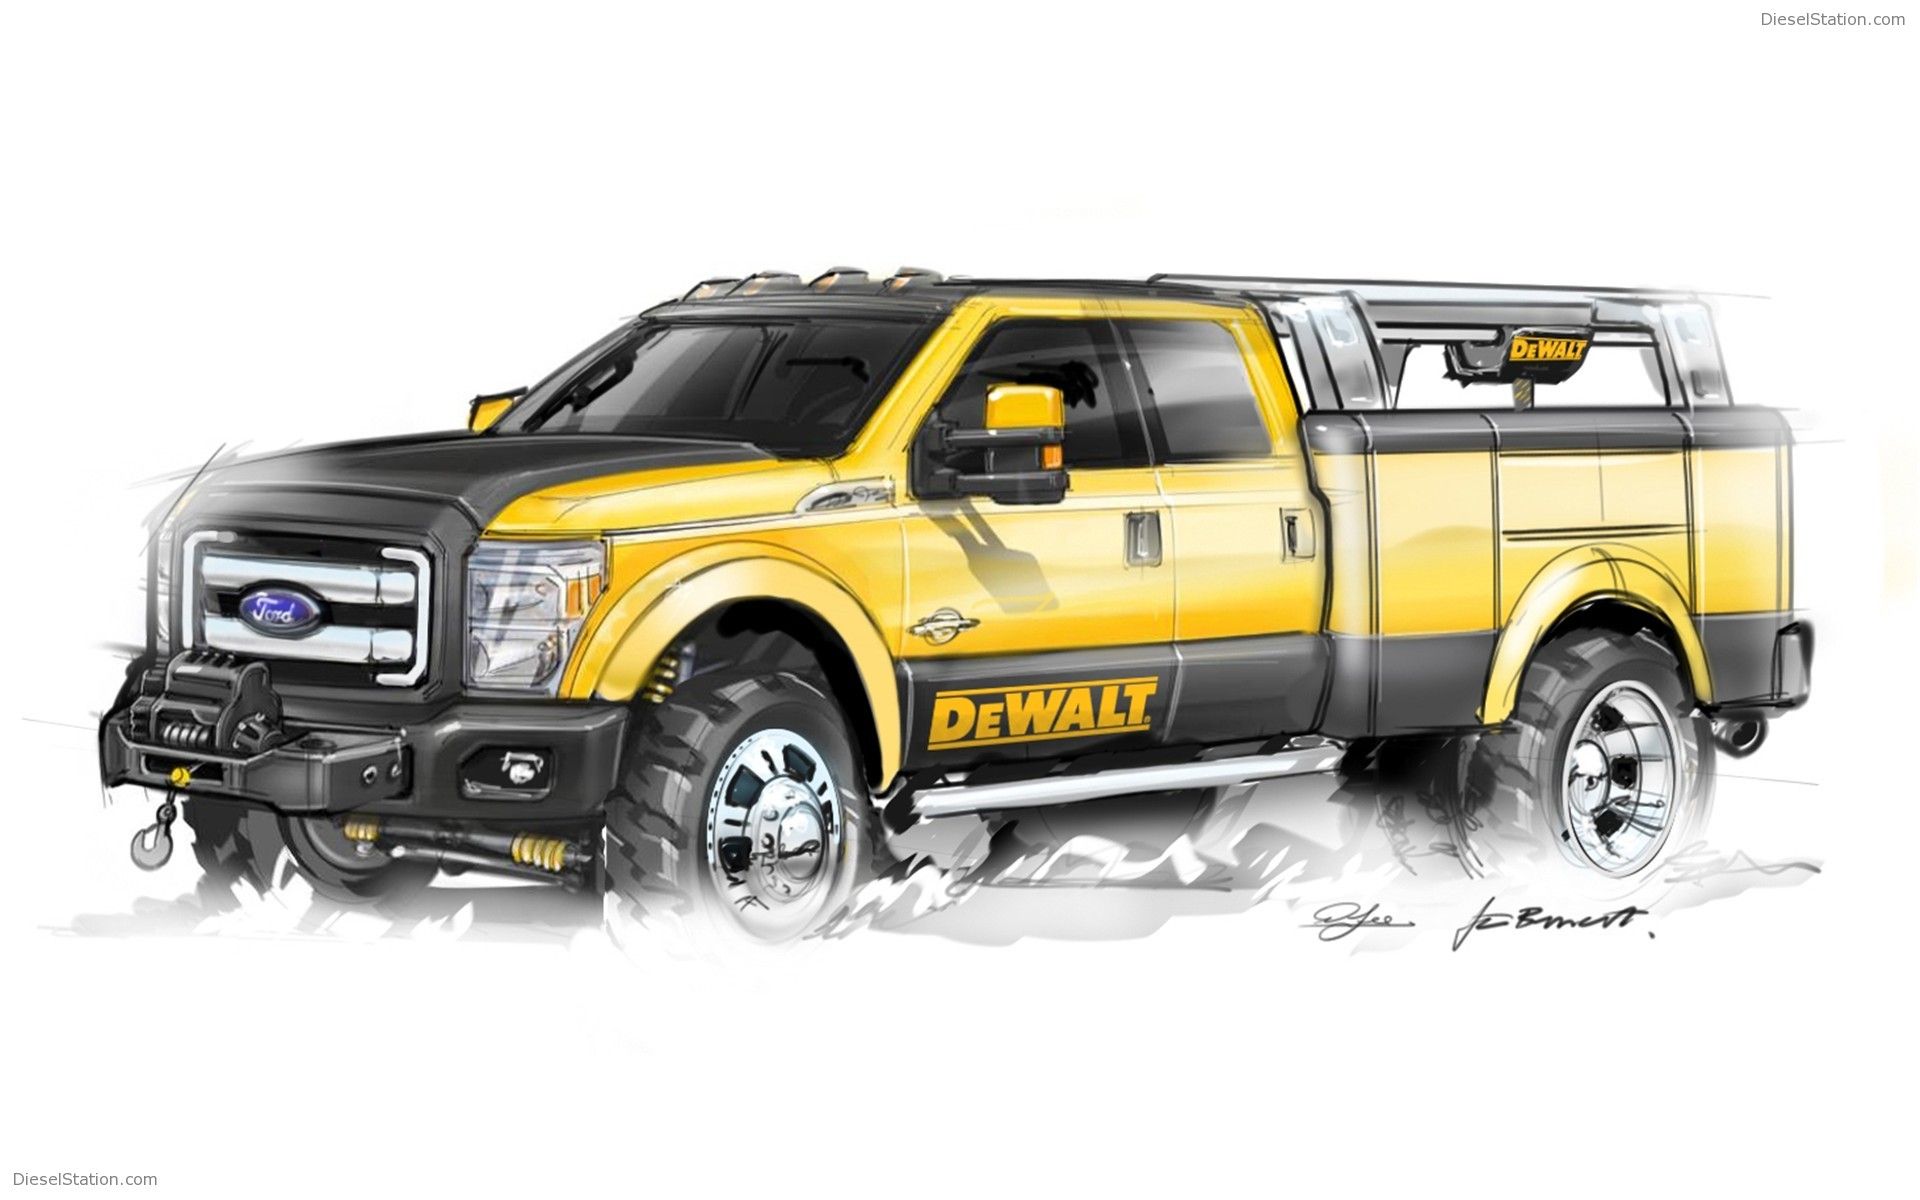 Ford F150 At 2009 SEMA Widescreen Exotic Car Wallpaper of 4, Diesel Station